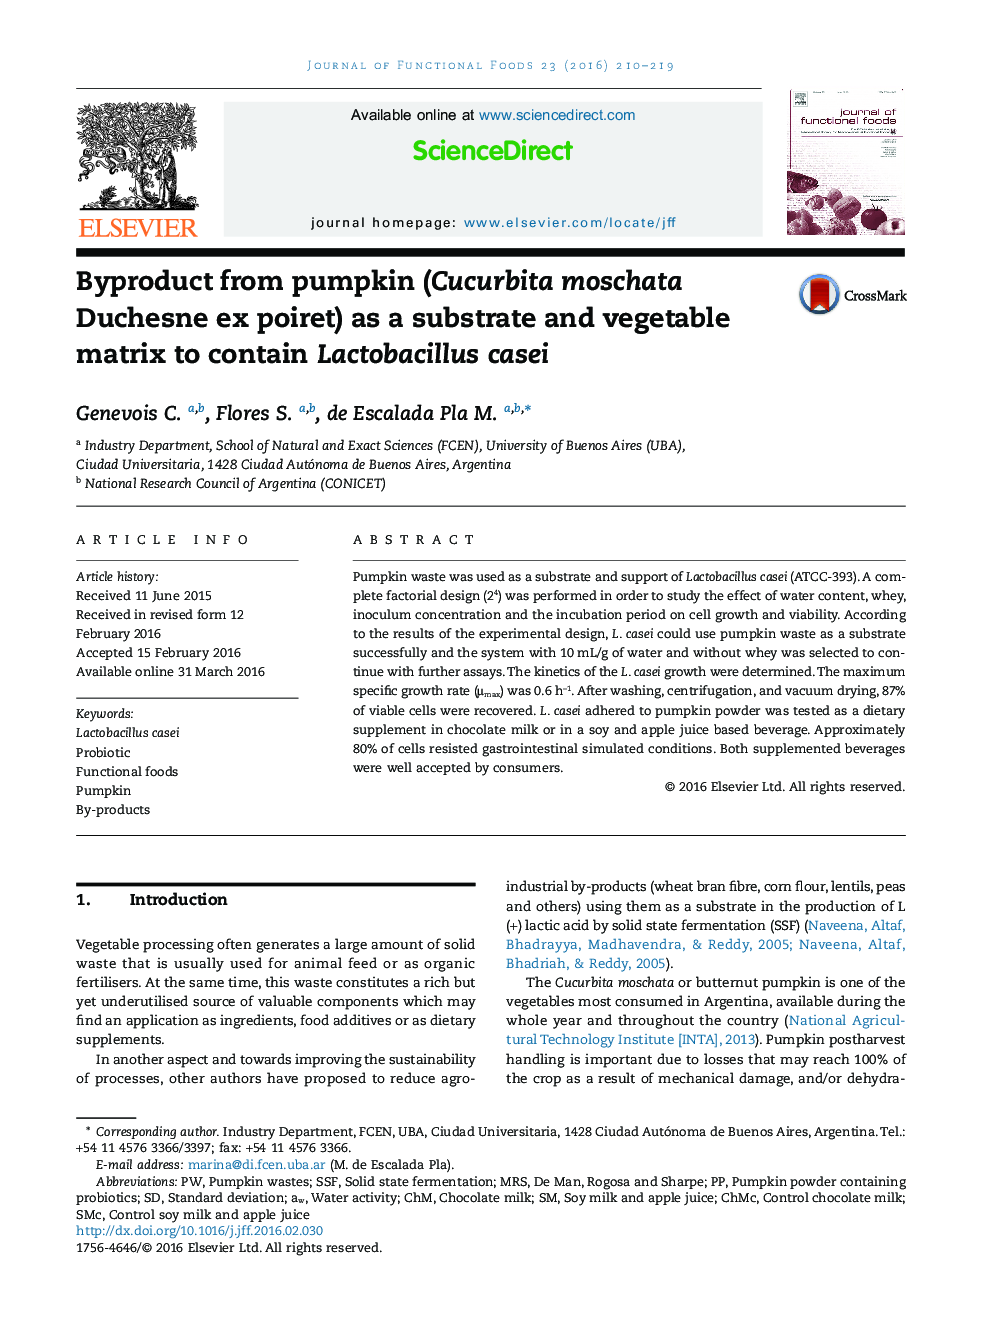 Byproduct from pumpkin (Cucurbita moschata Duchesne ex poiret) as a substrate and vegetable matrix to contain Lactobacillus casei